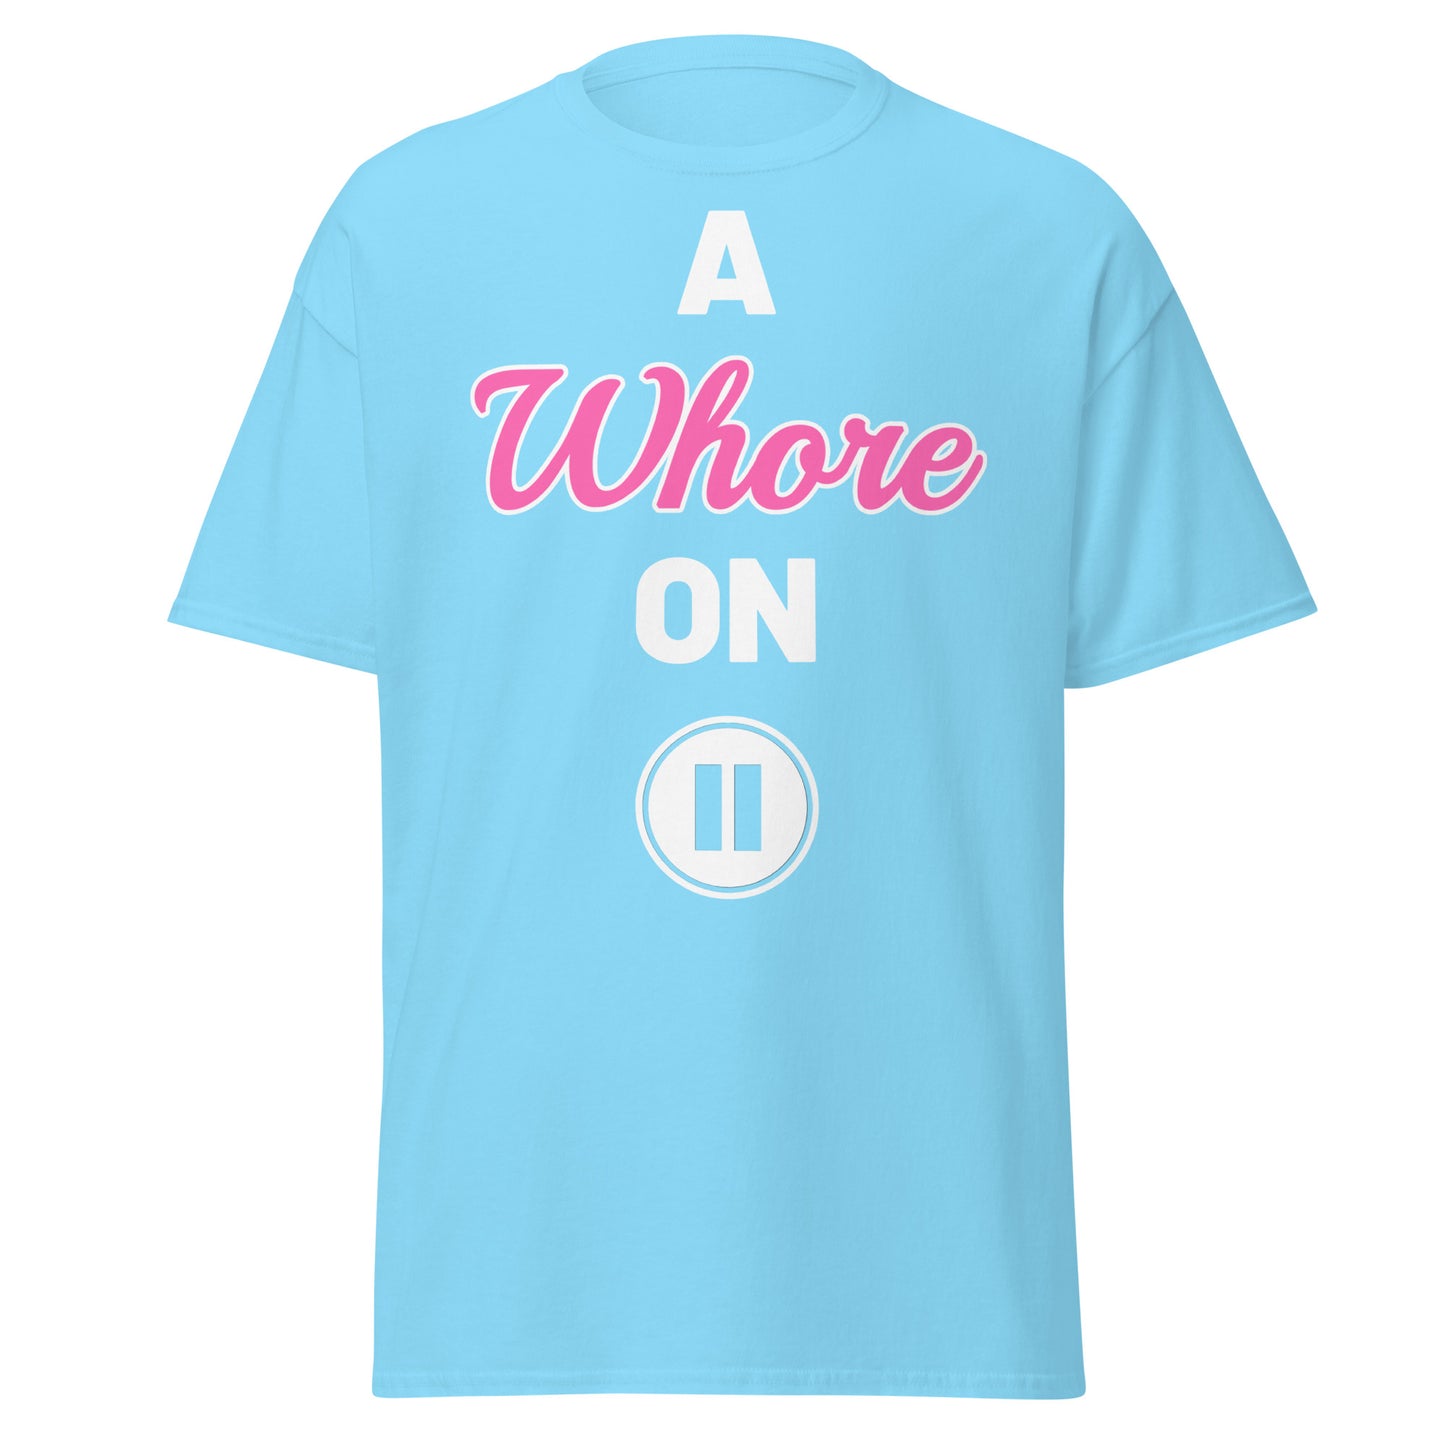 A Whore On Pause T-Shirt!